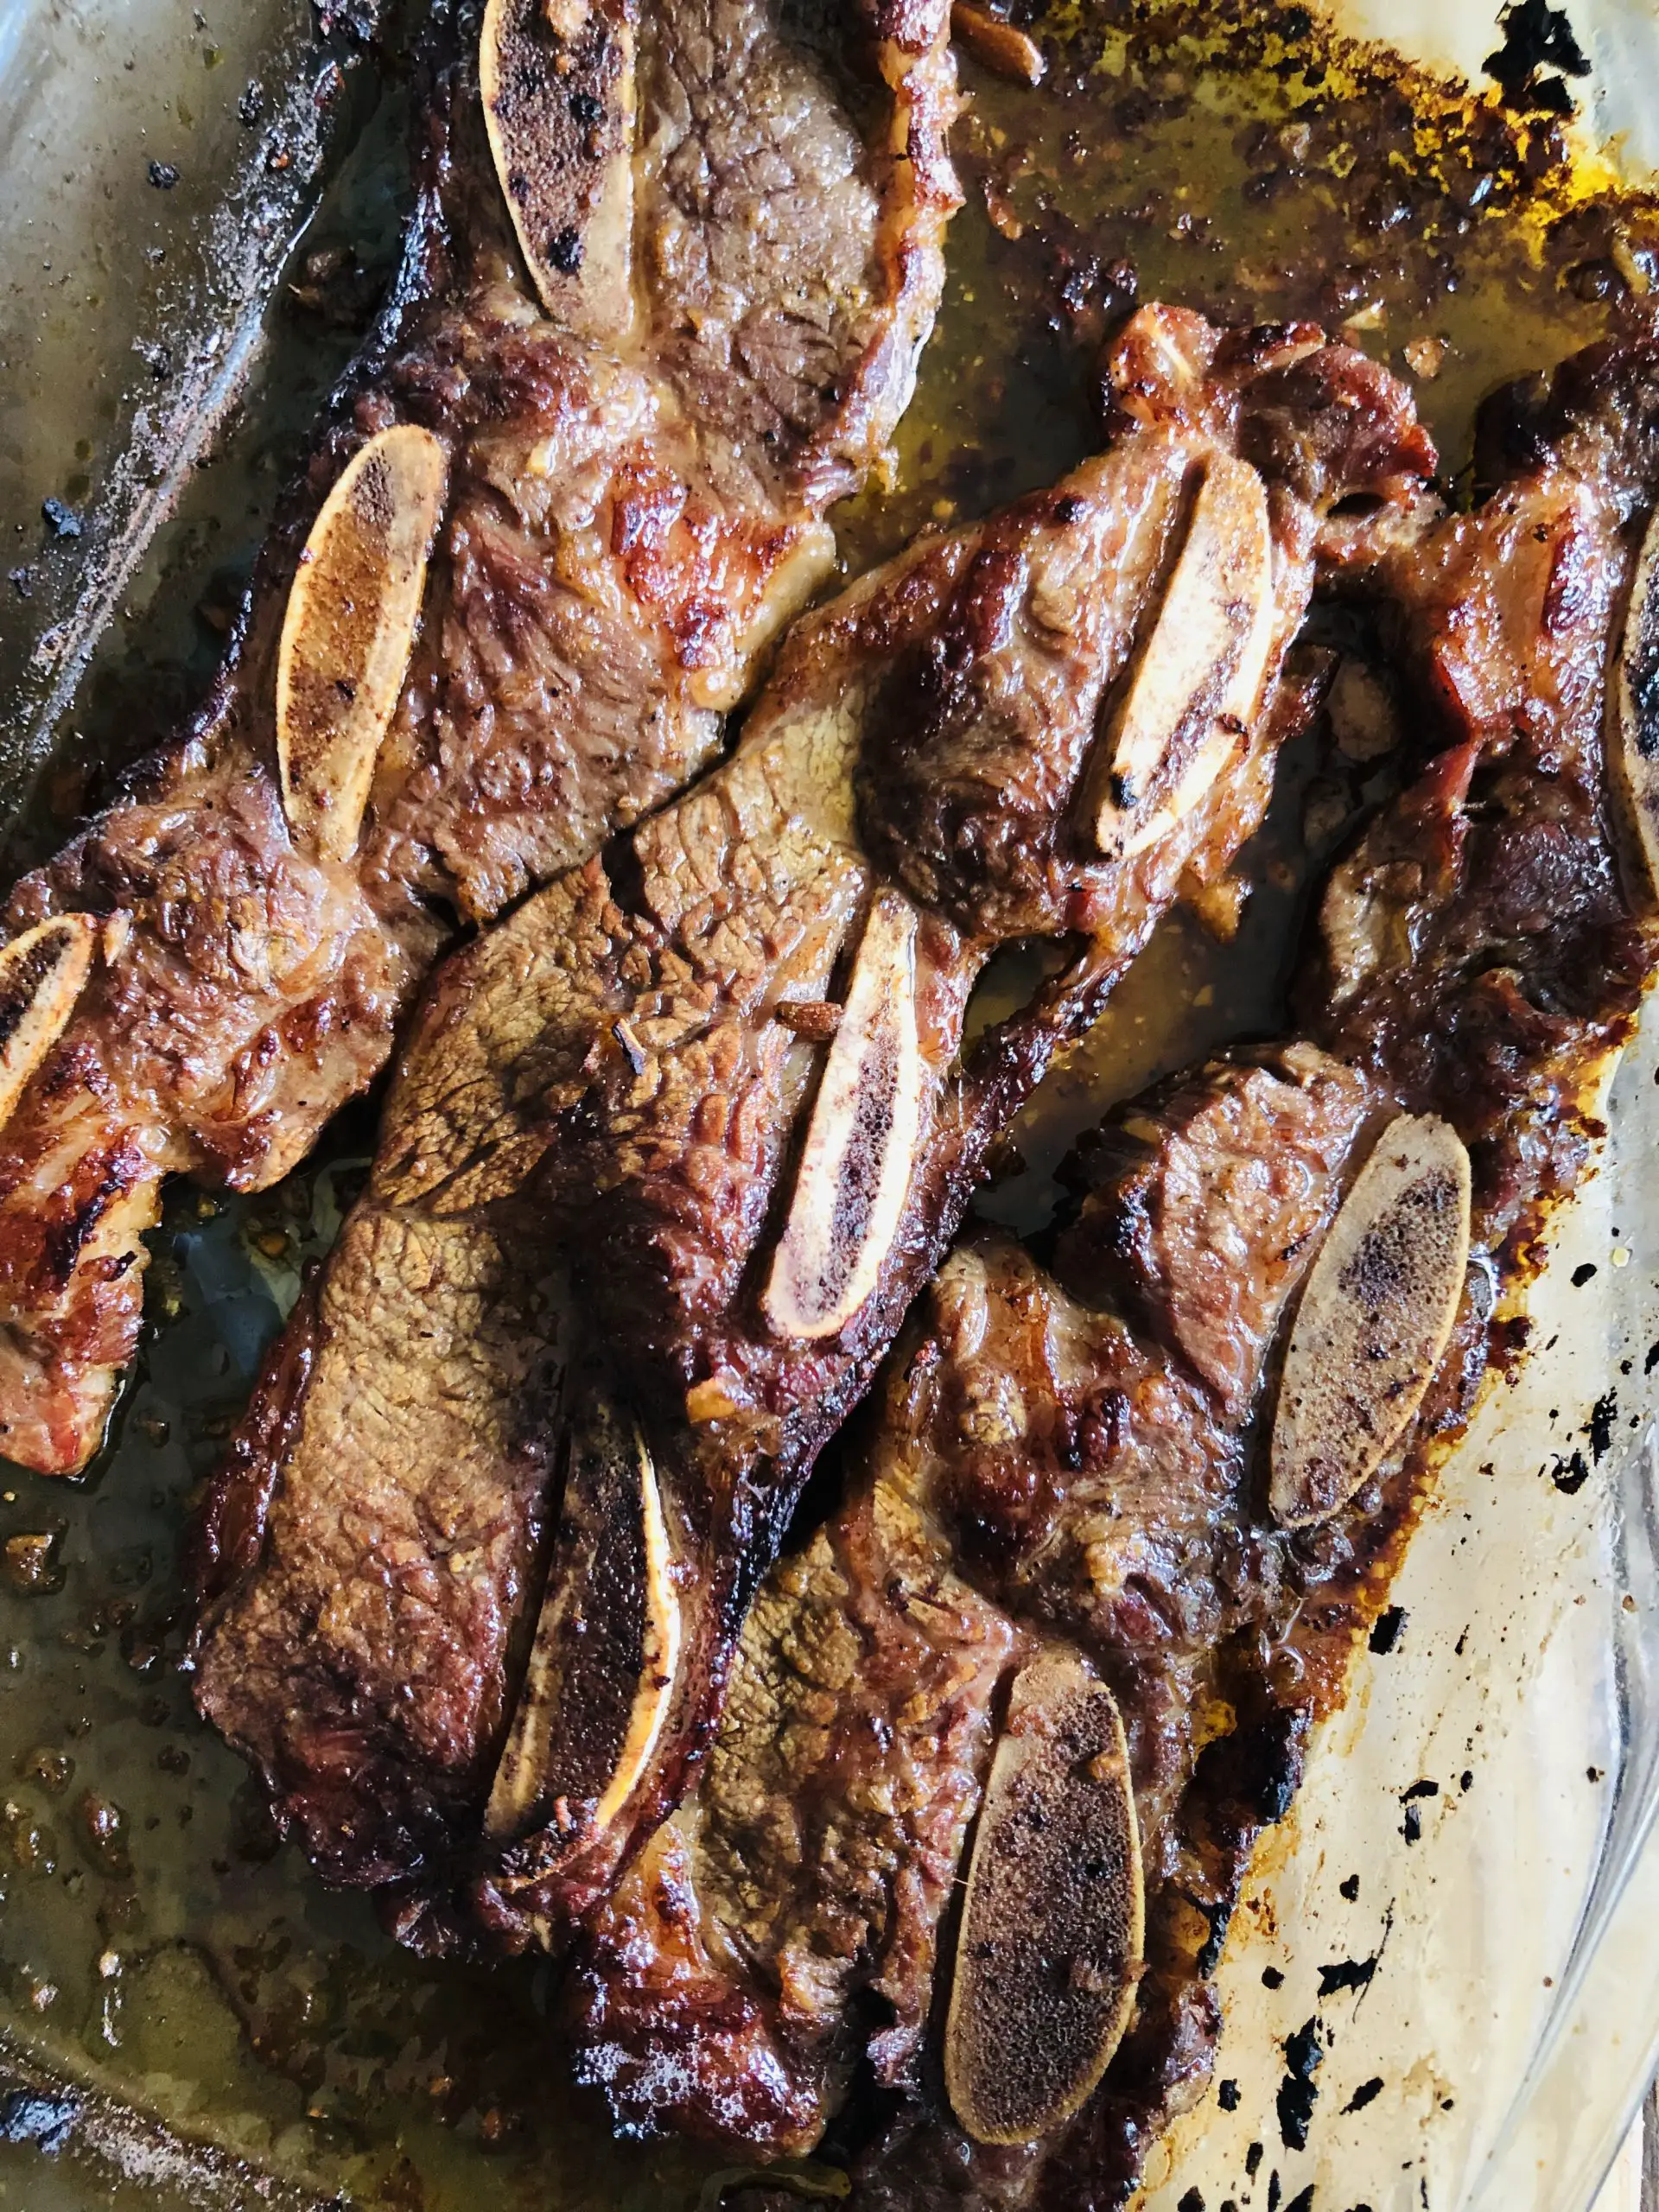 Korean Short Ribs in a glass dish that have just been baked